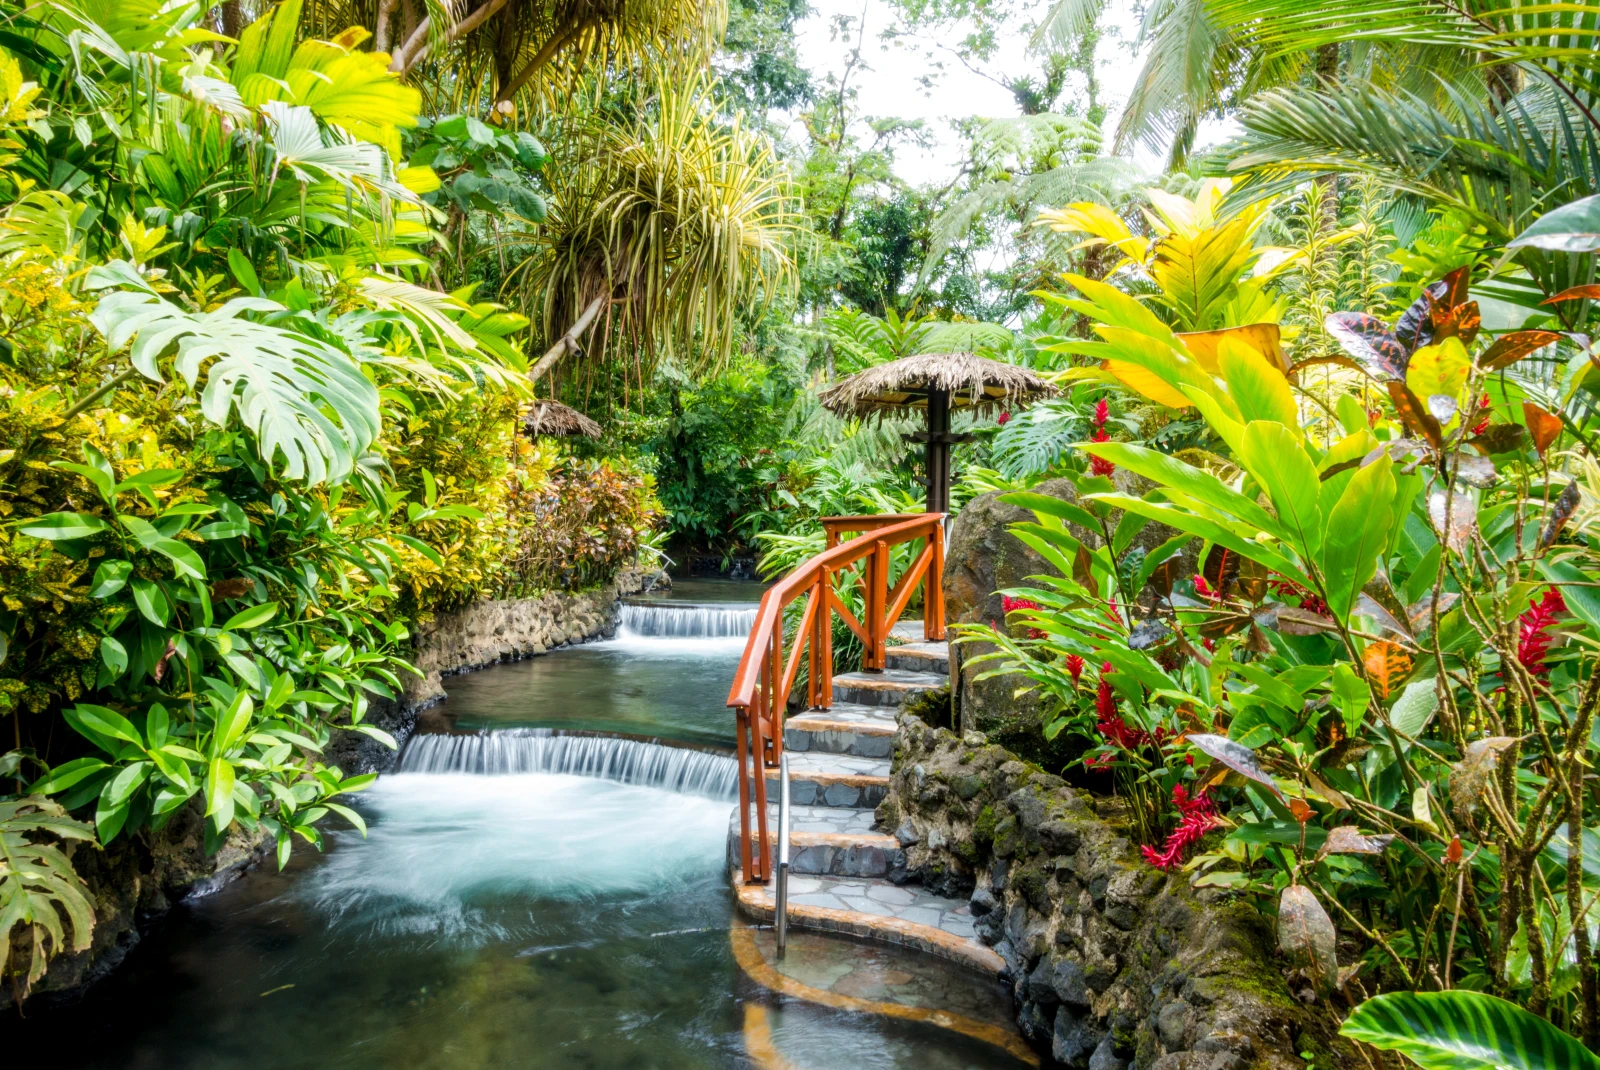 Thermal river in a tropical setting in Costa Rica. 